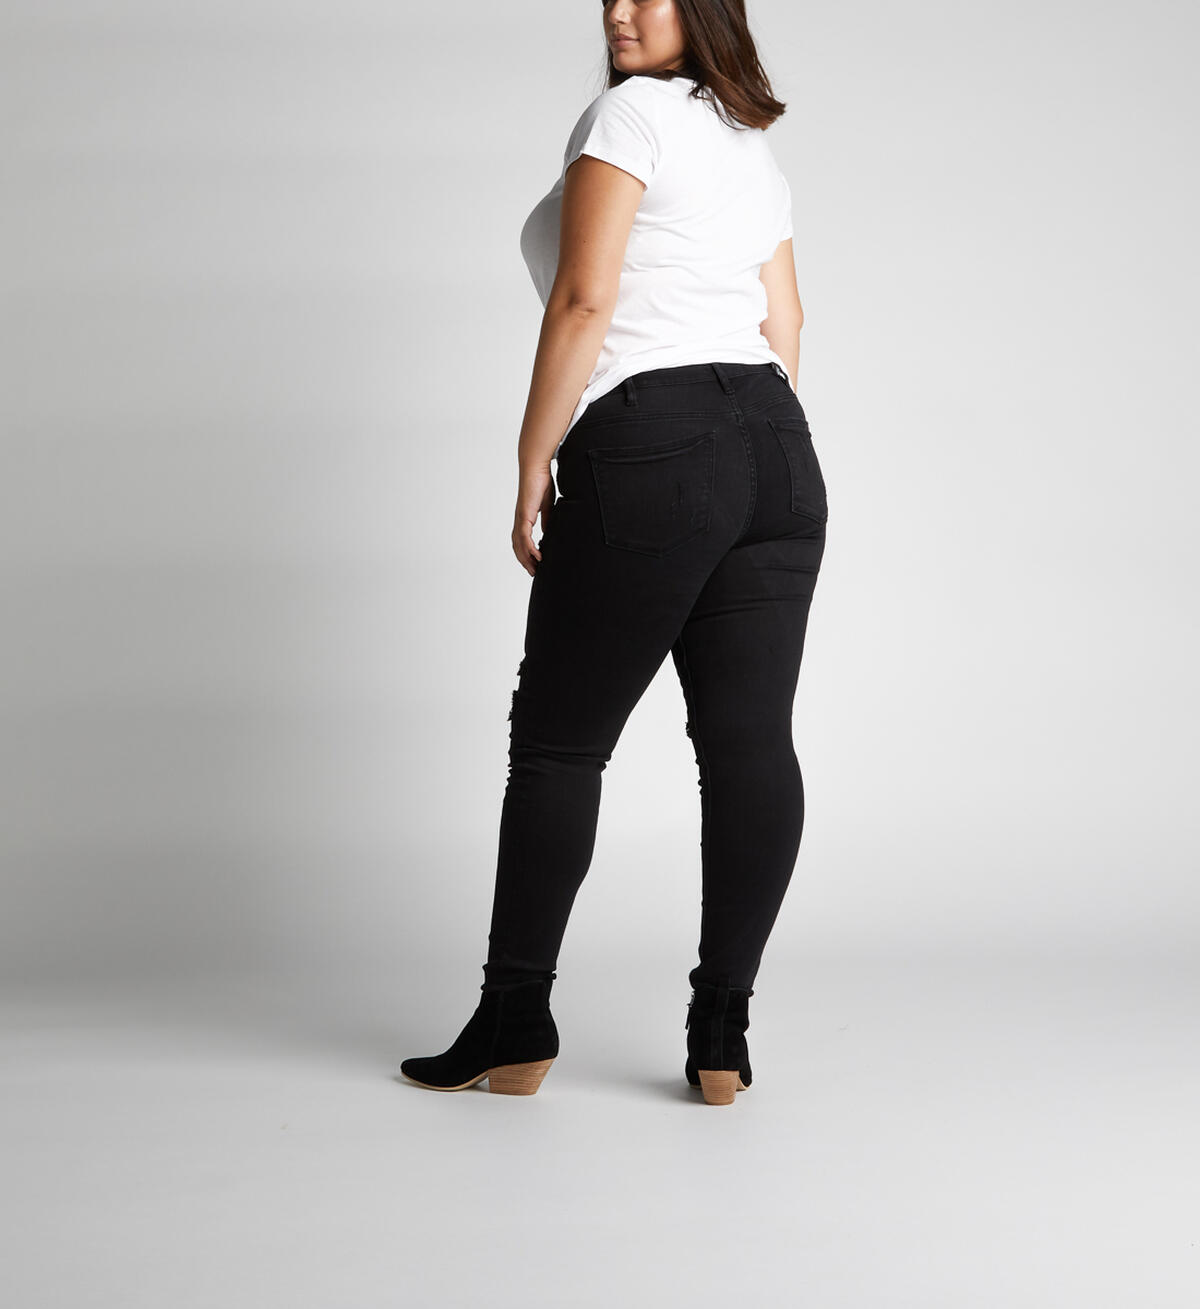 Aiko Mid Rise Skinny Leg Jeans Plus Size Final Sale, , hi-res image number 1